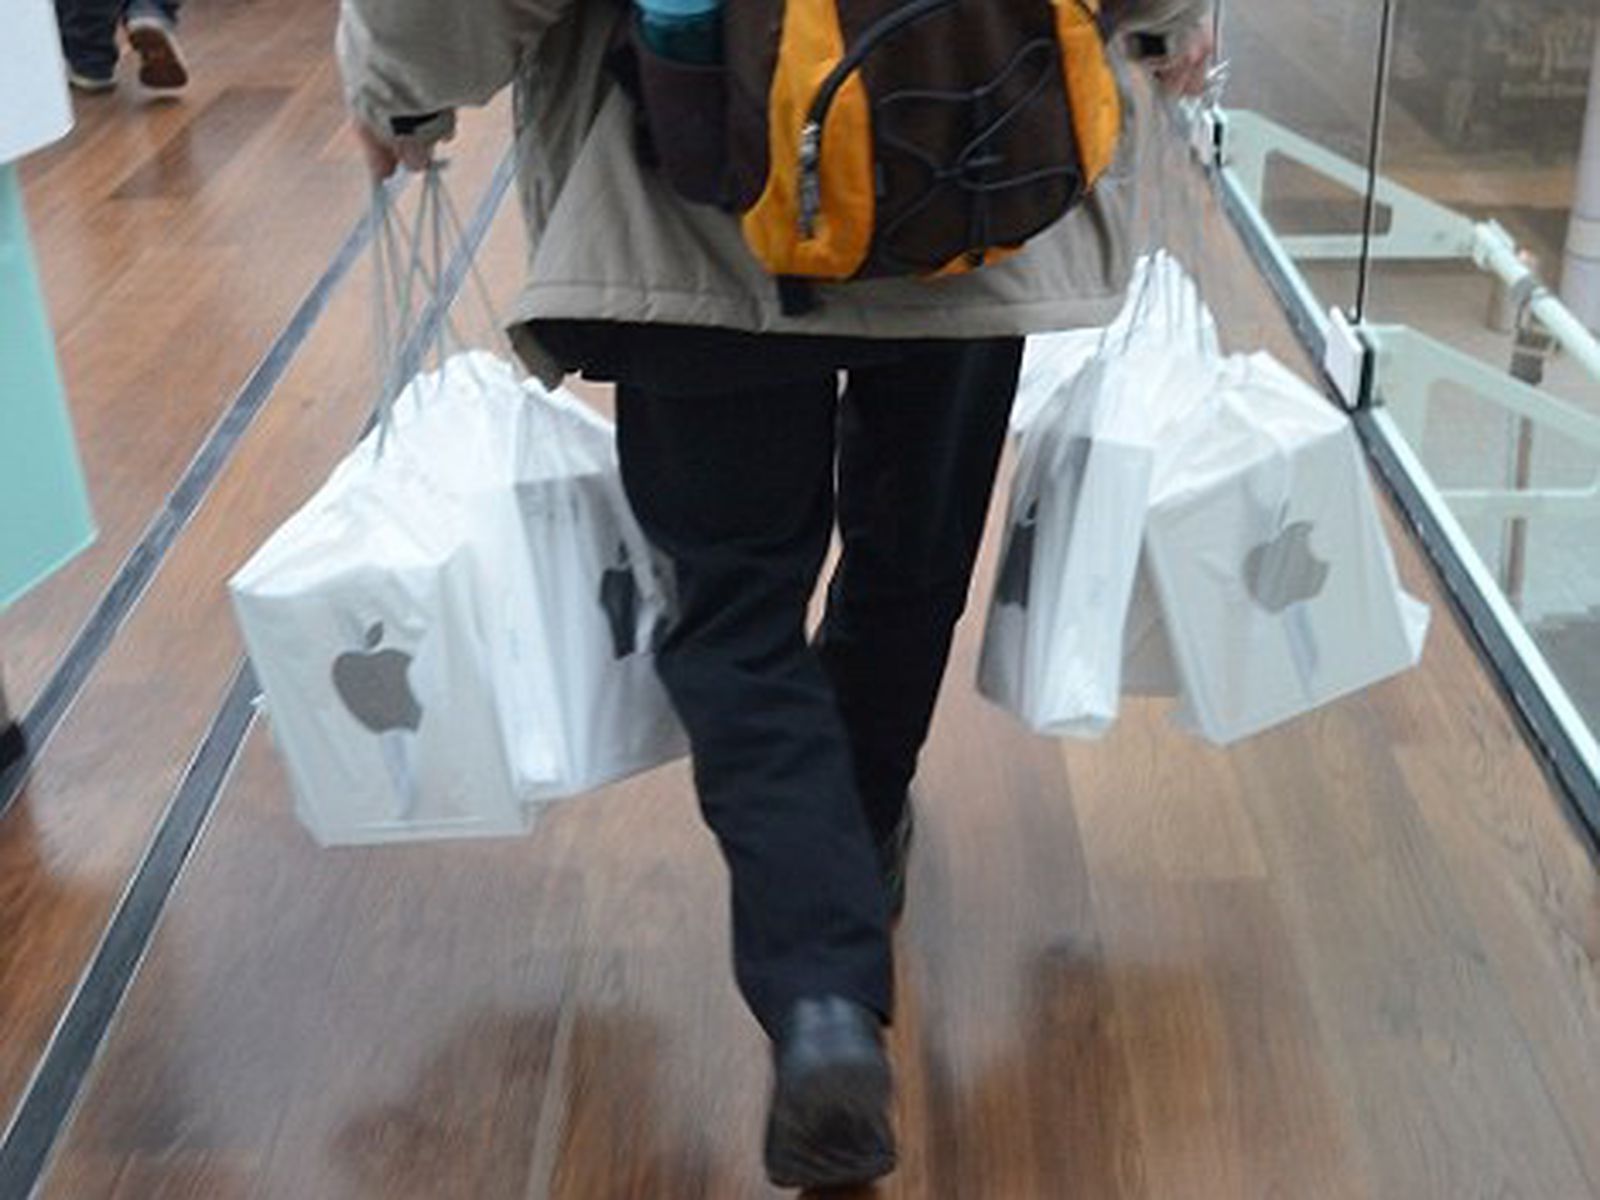 Apple to Phase Out Plastic Bags for Environmentally Friendly Paper